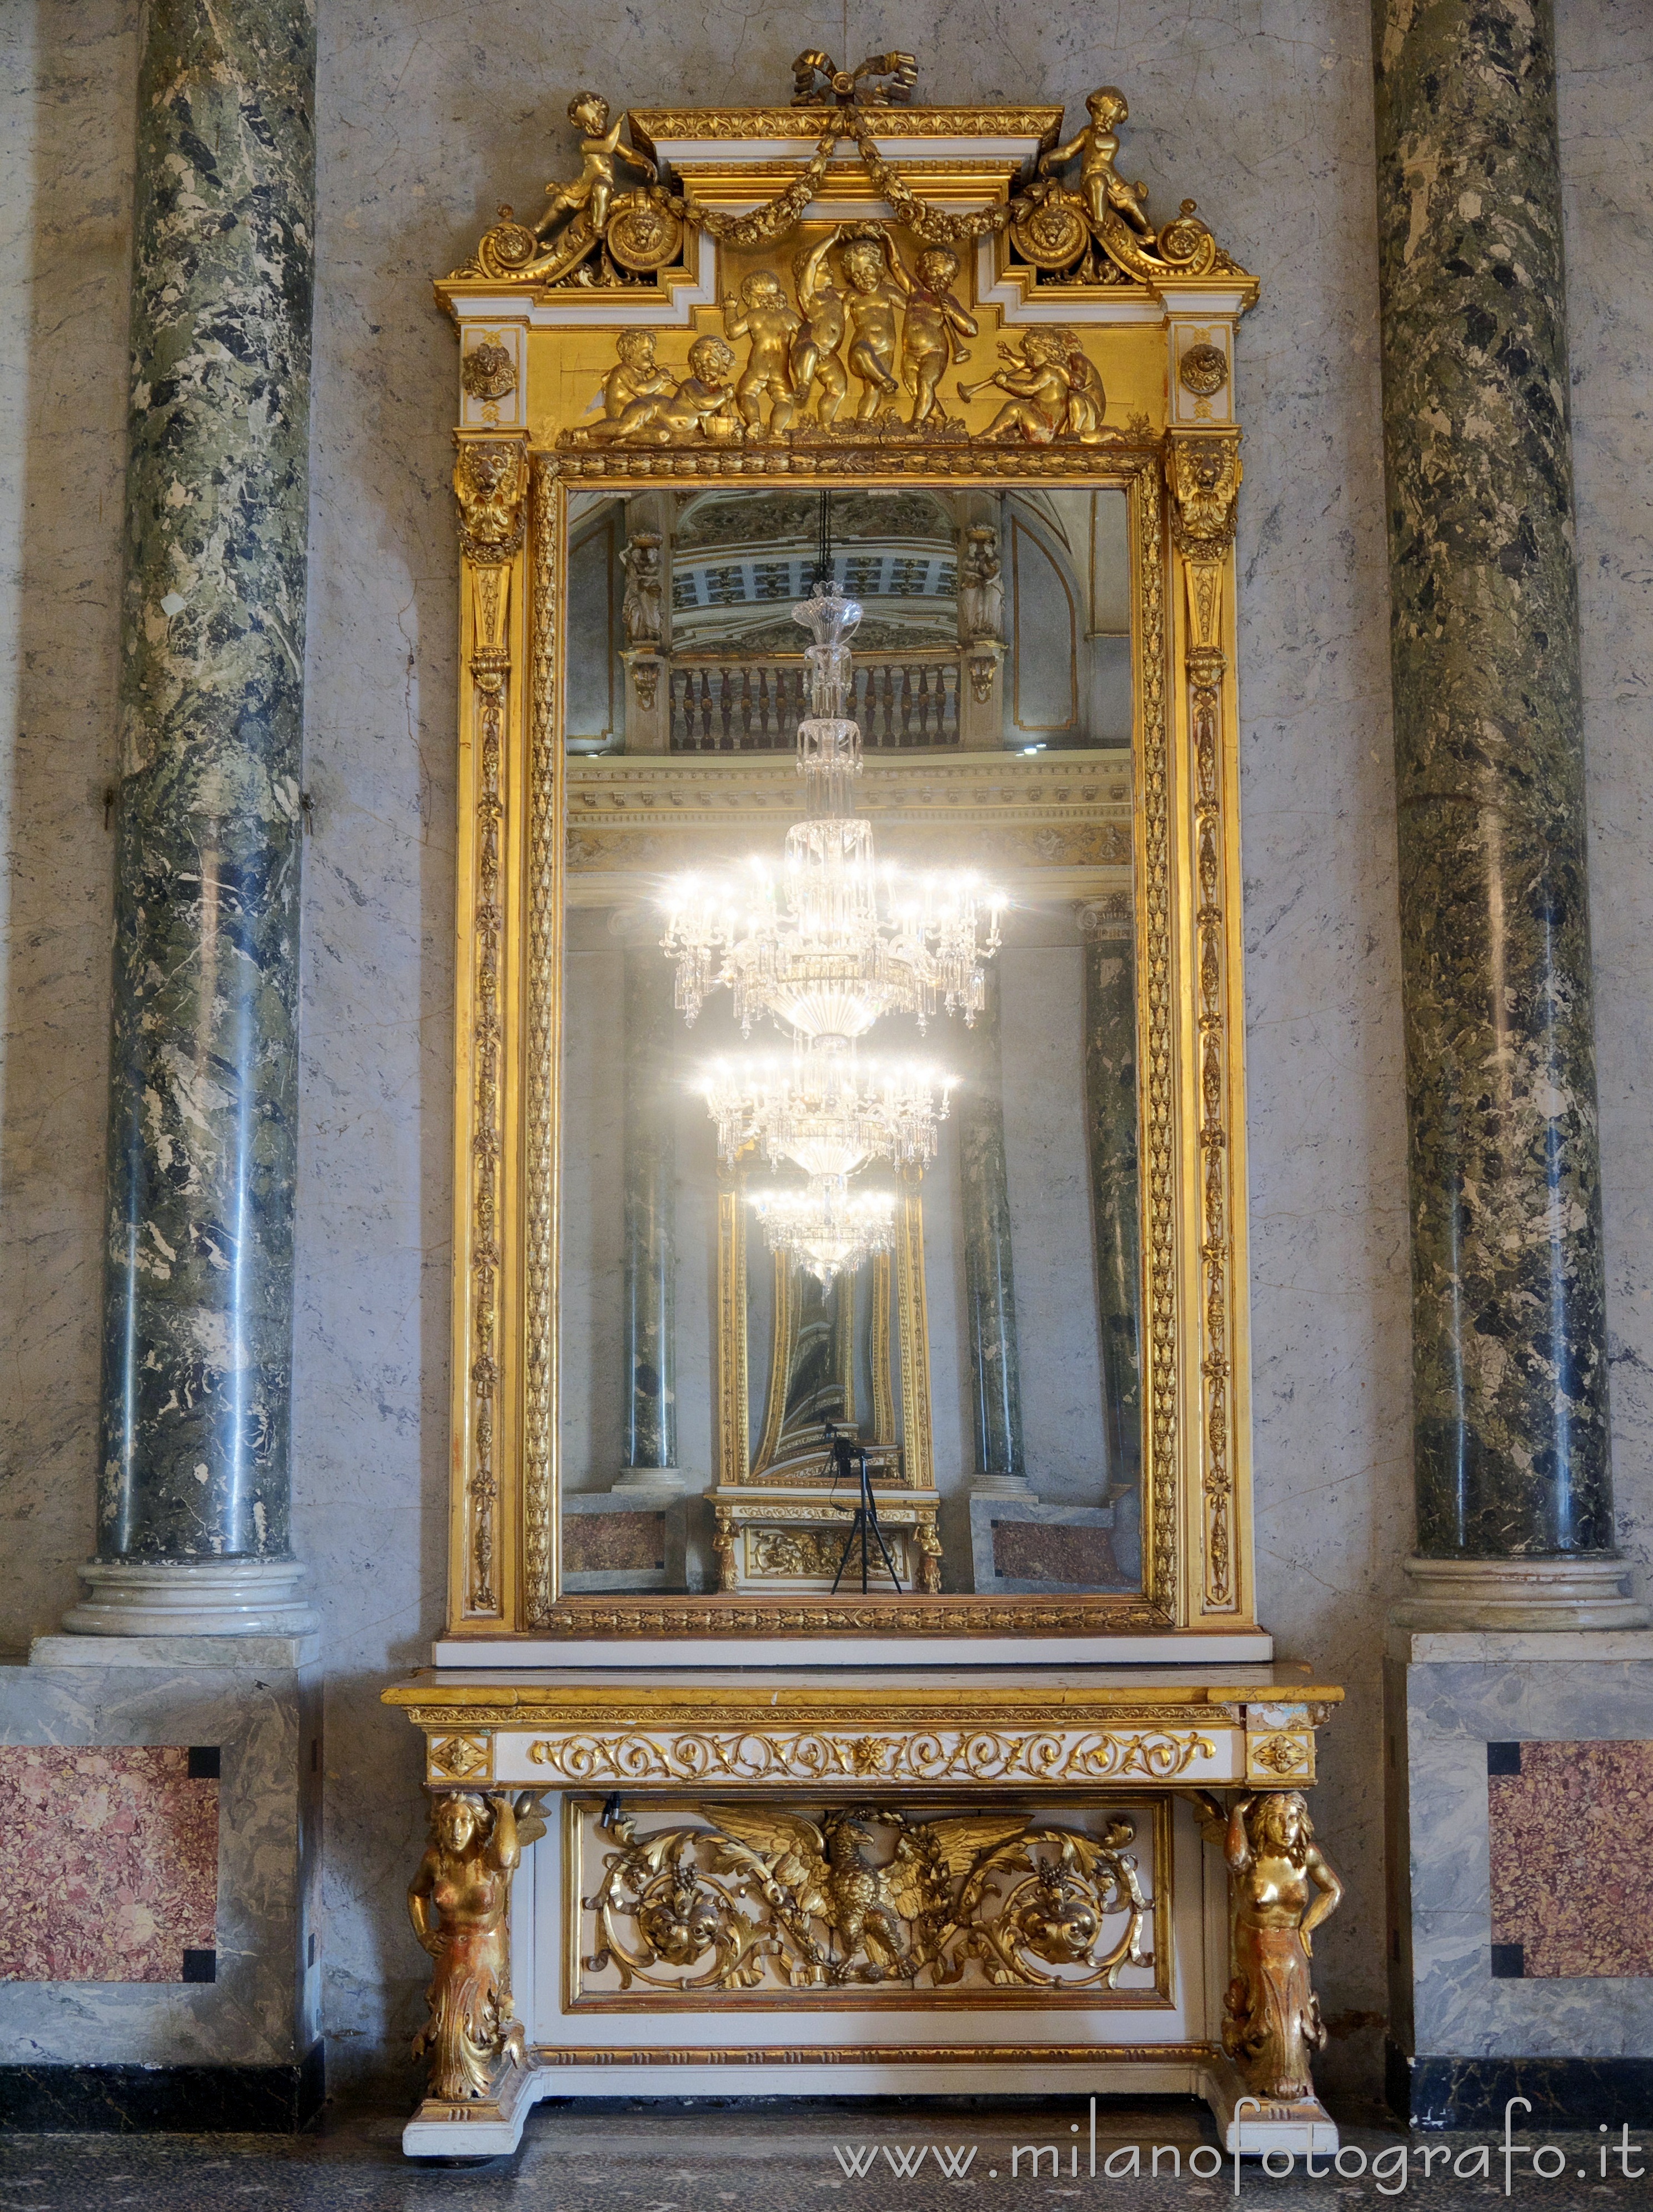 Milan (Italy): Large mirror in the Napoleonic Hall of Serbelloni Palace - Milan (Italy)